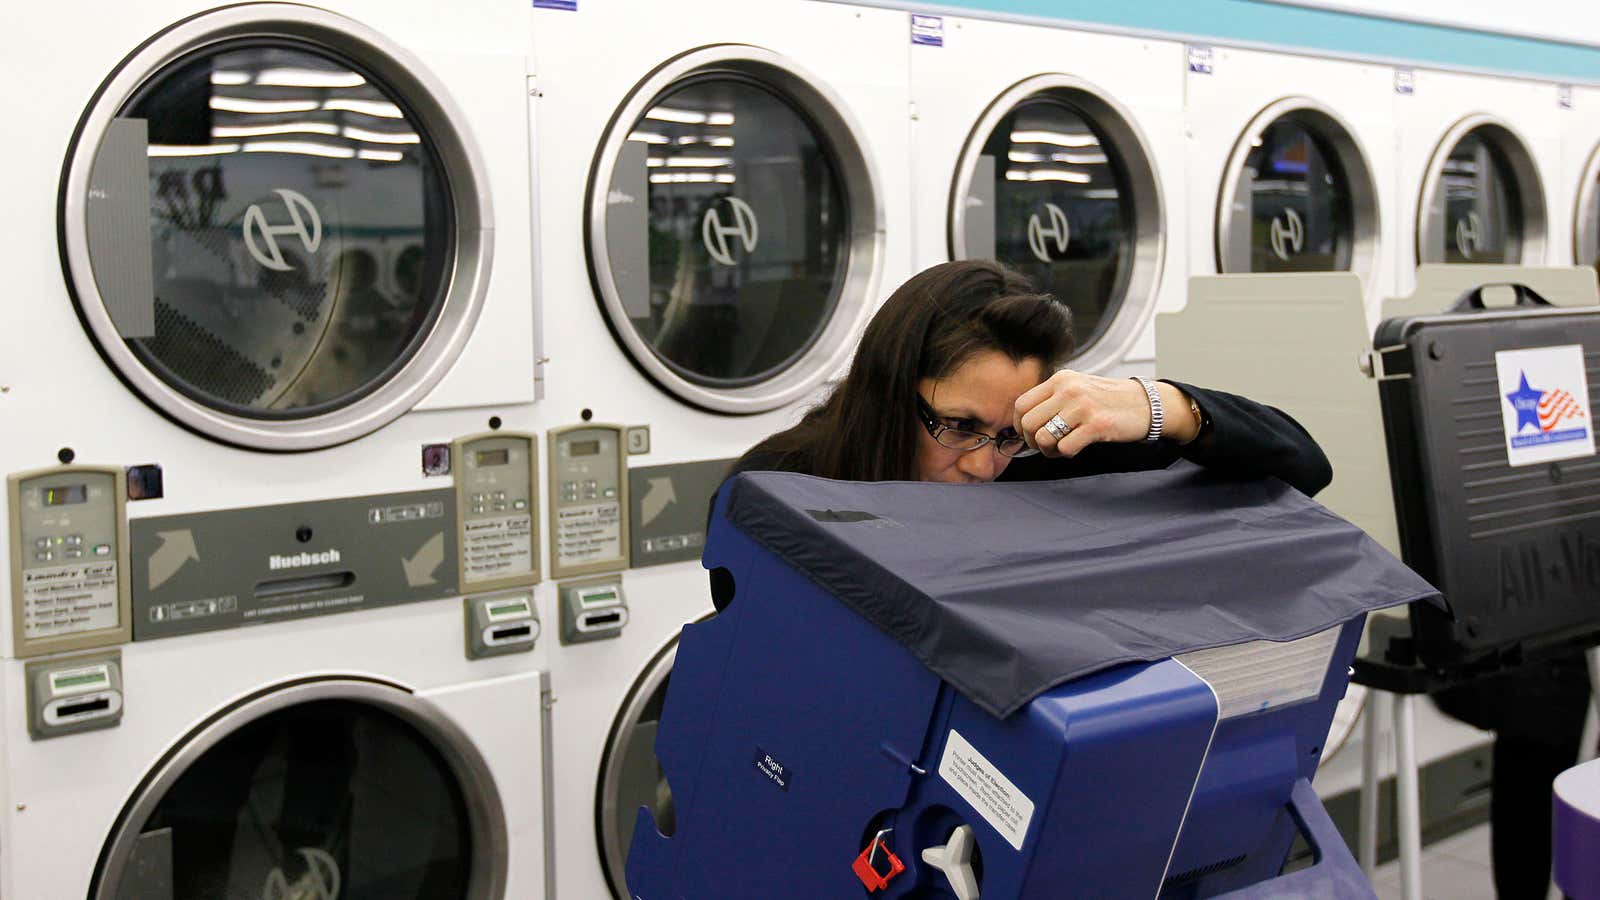 Voting at a 24-hour laundromat in Chicago